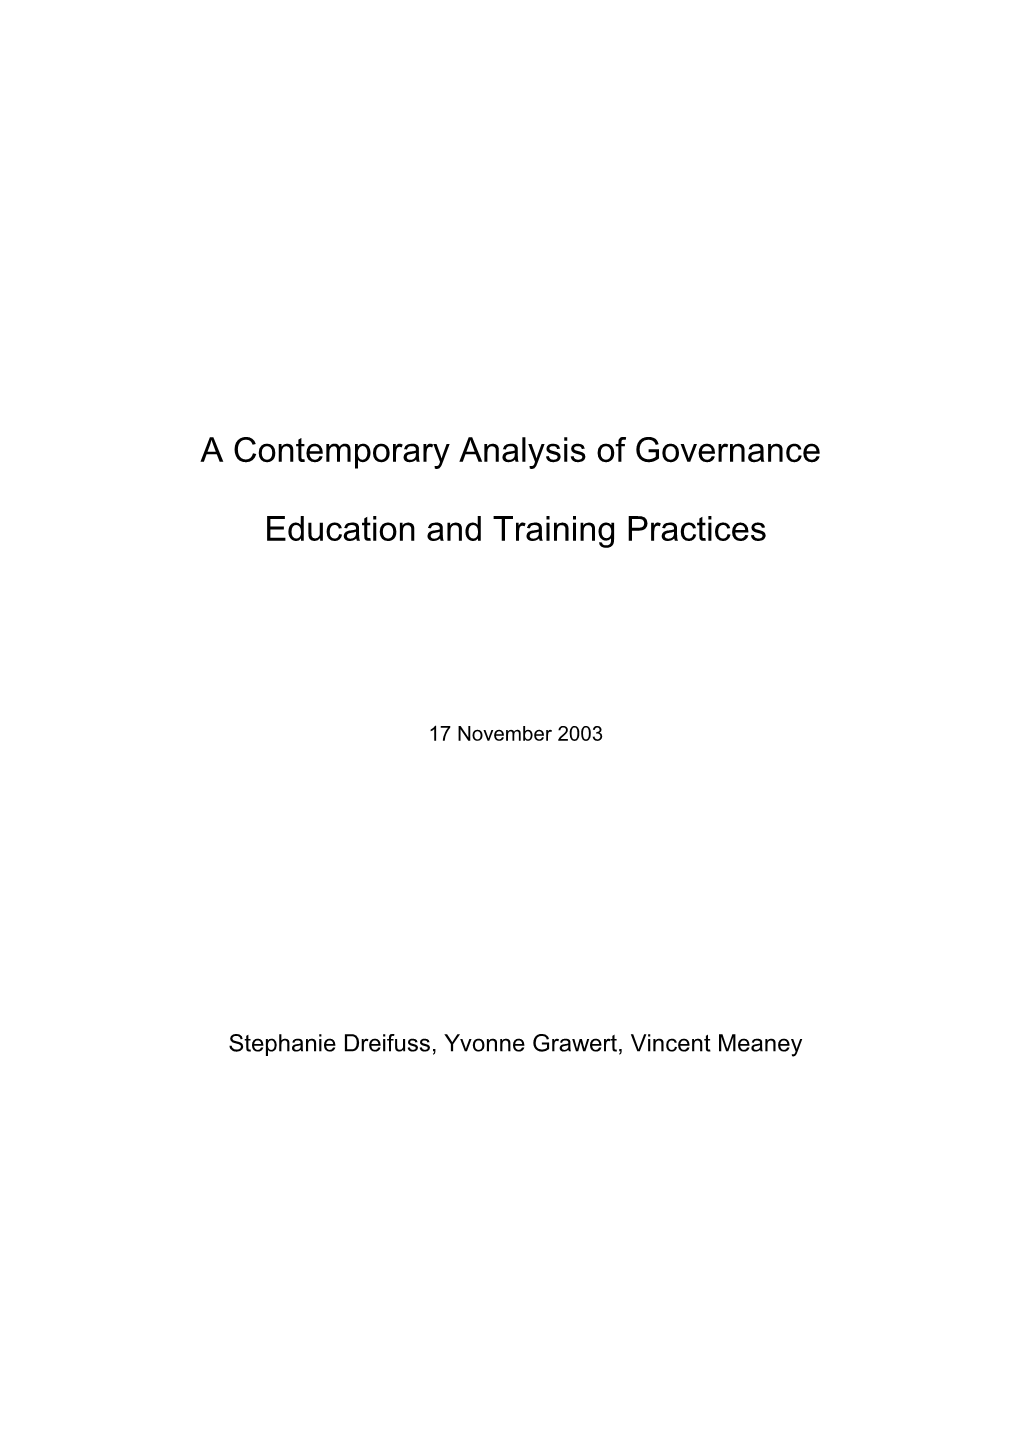 A Contemporary Analysis of Governance Education and Training Practices